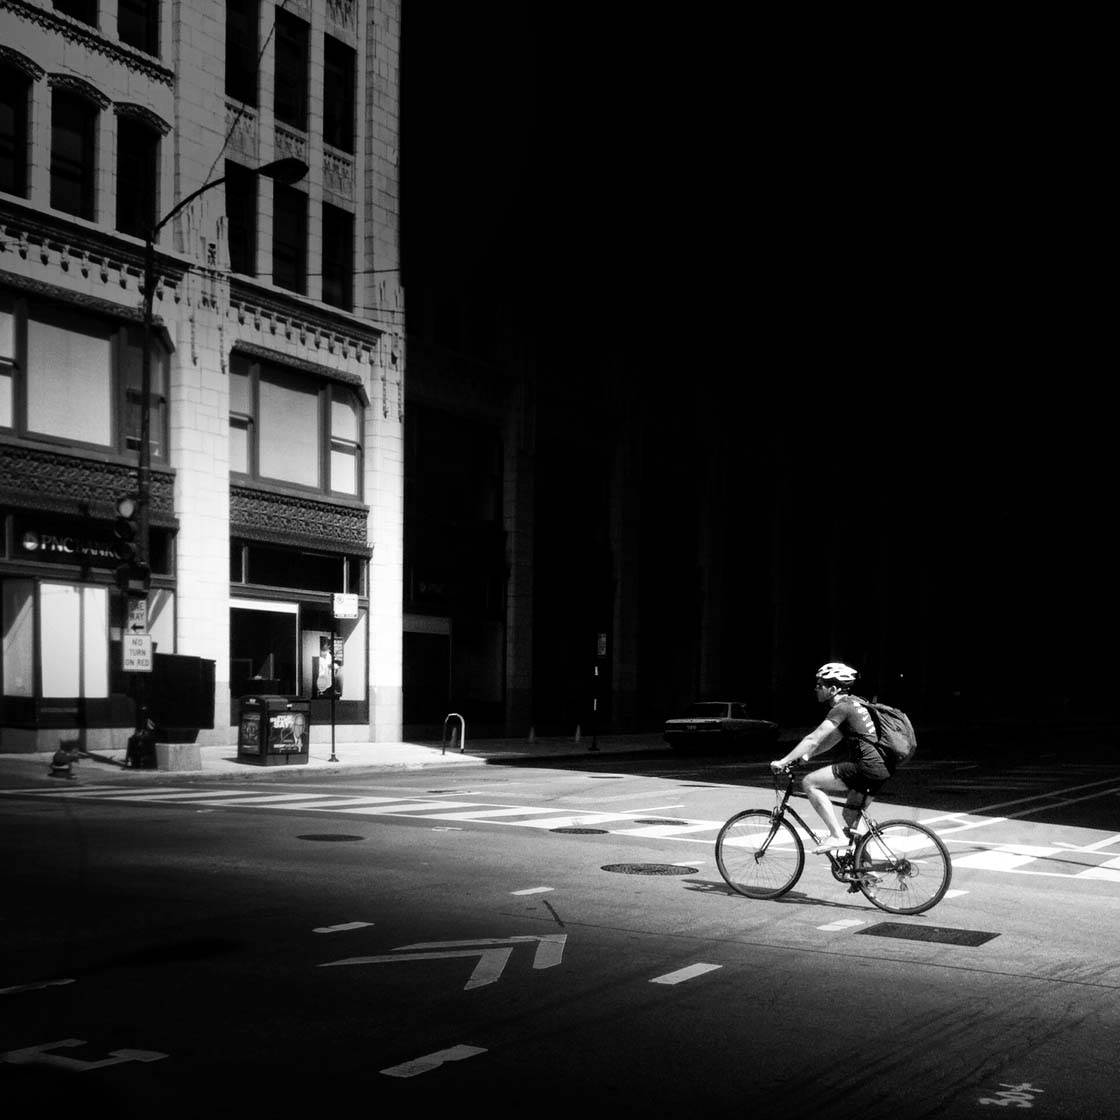 iPhone Street Photography Tips 10